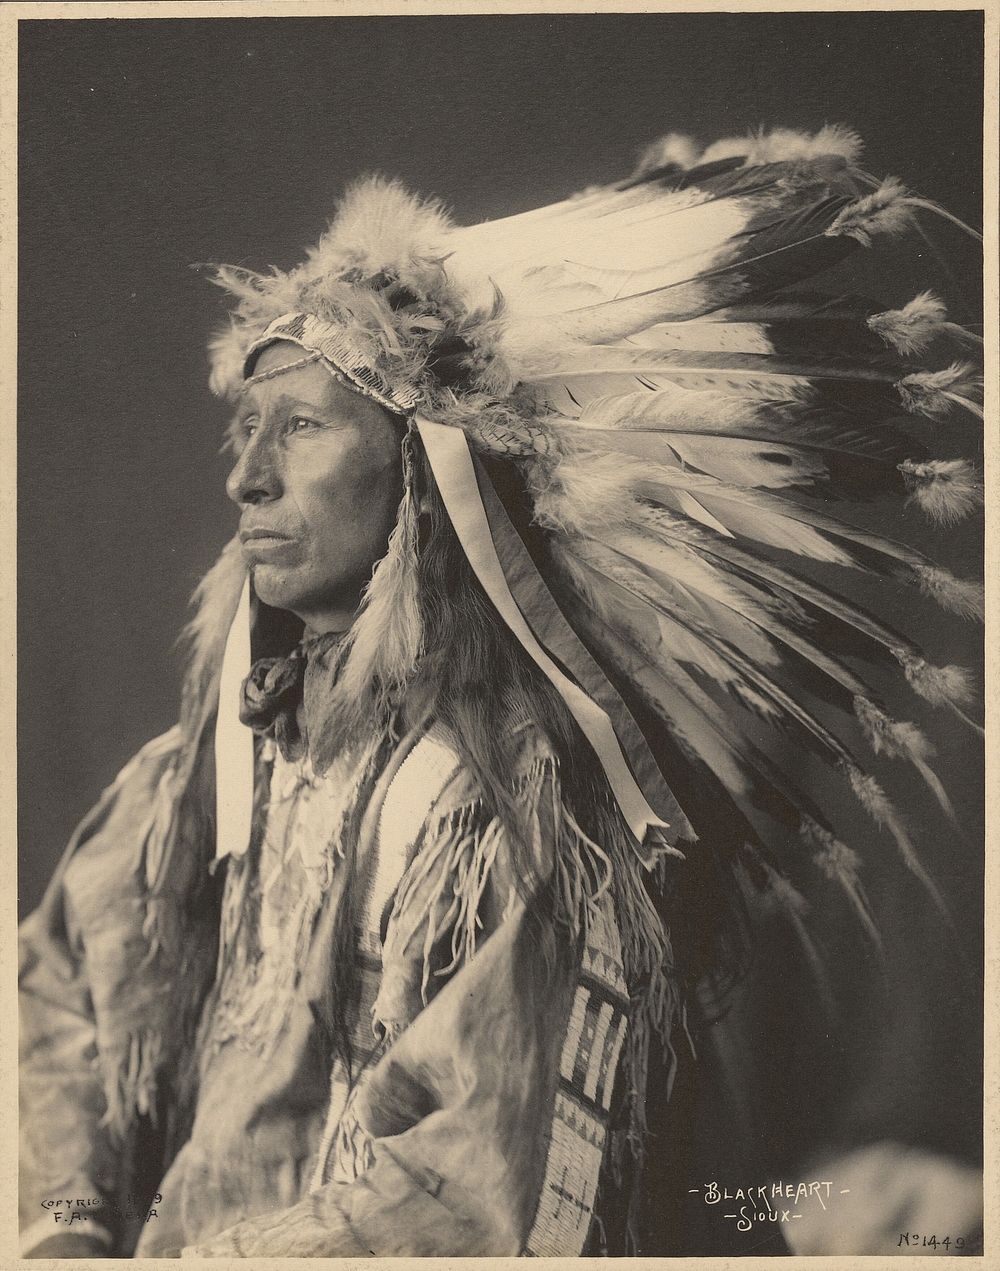 Blackheart, Sioux by Adolph F Muhr and Frank A Rinehart